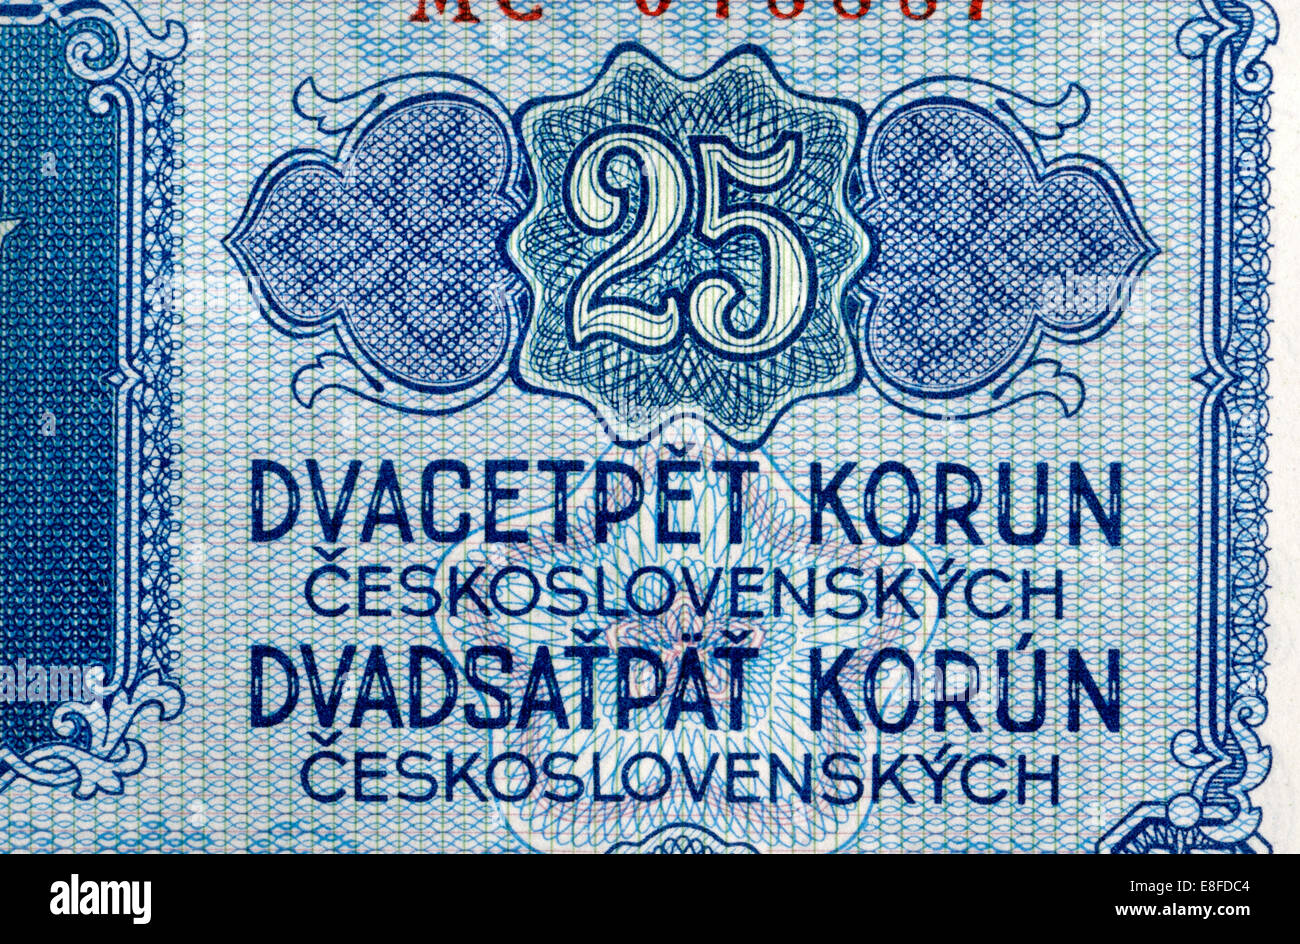 Detail from a Czechoslovakian 1953 banknote showing Czech and Slovak languages - 25 crowns Stock Photo